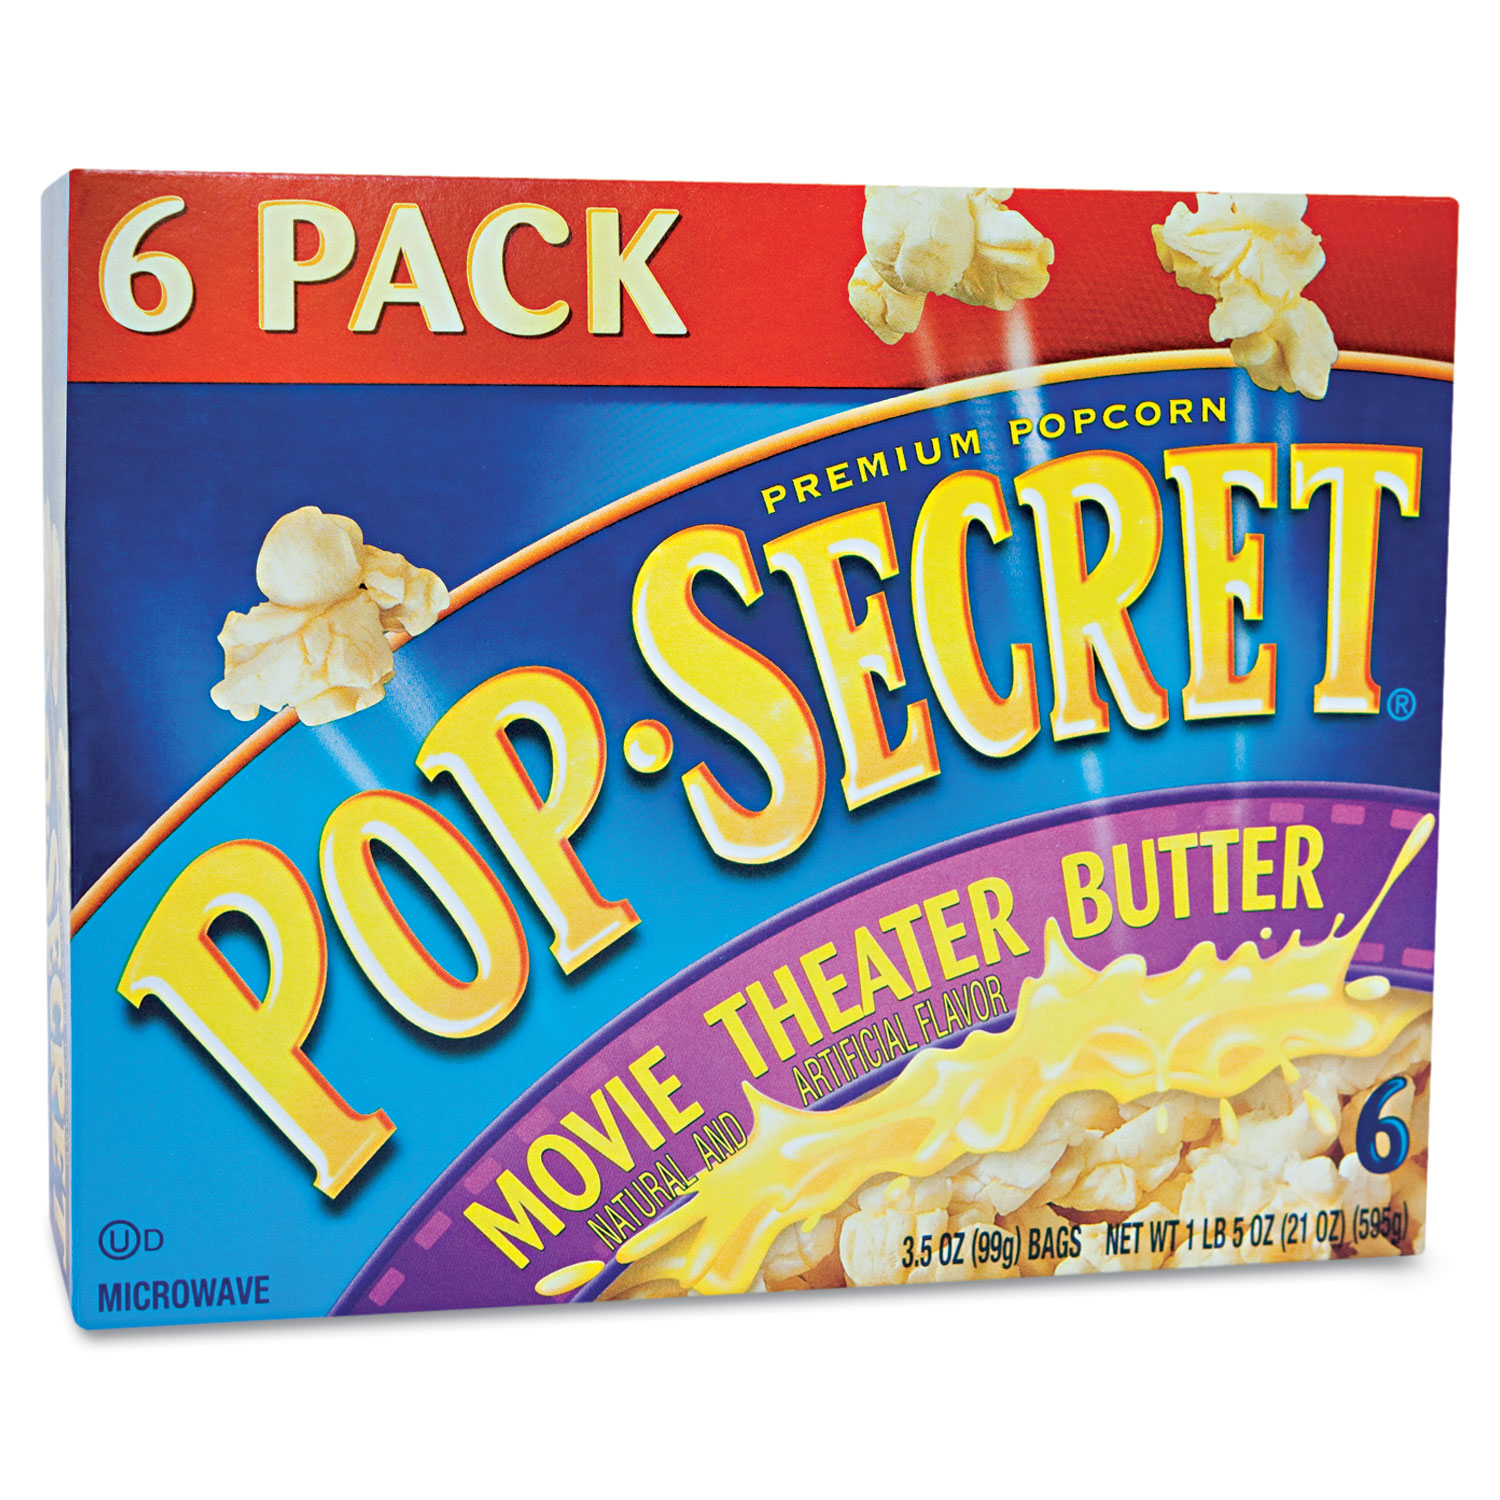 Microwave Popcorn, Movie Theater Butter, 3.2oz Bags, 6/Box